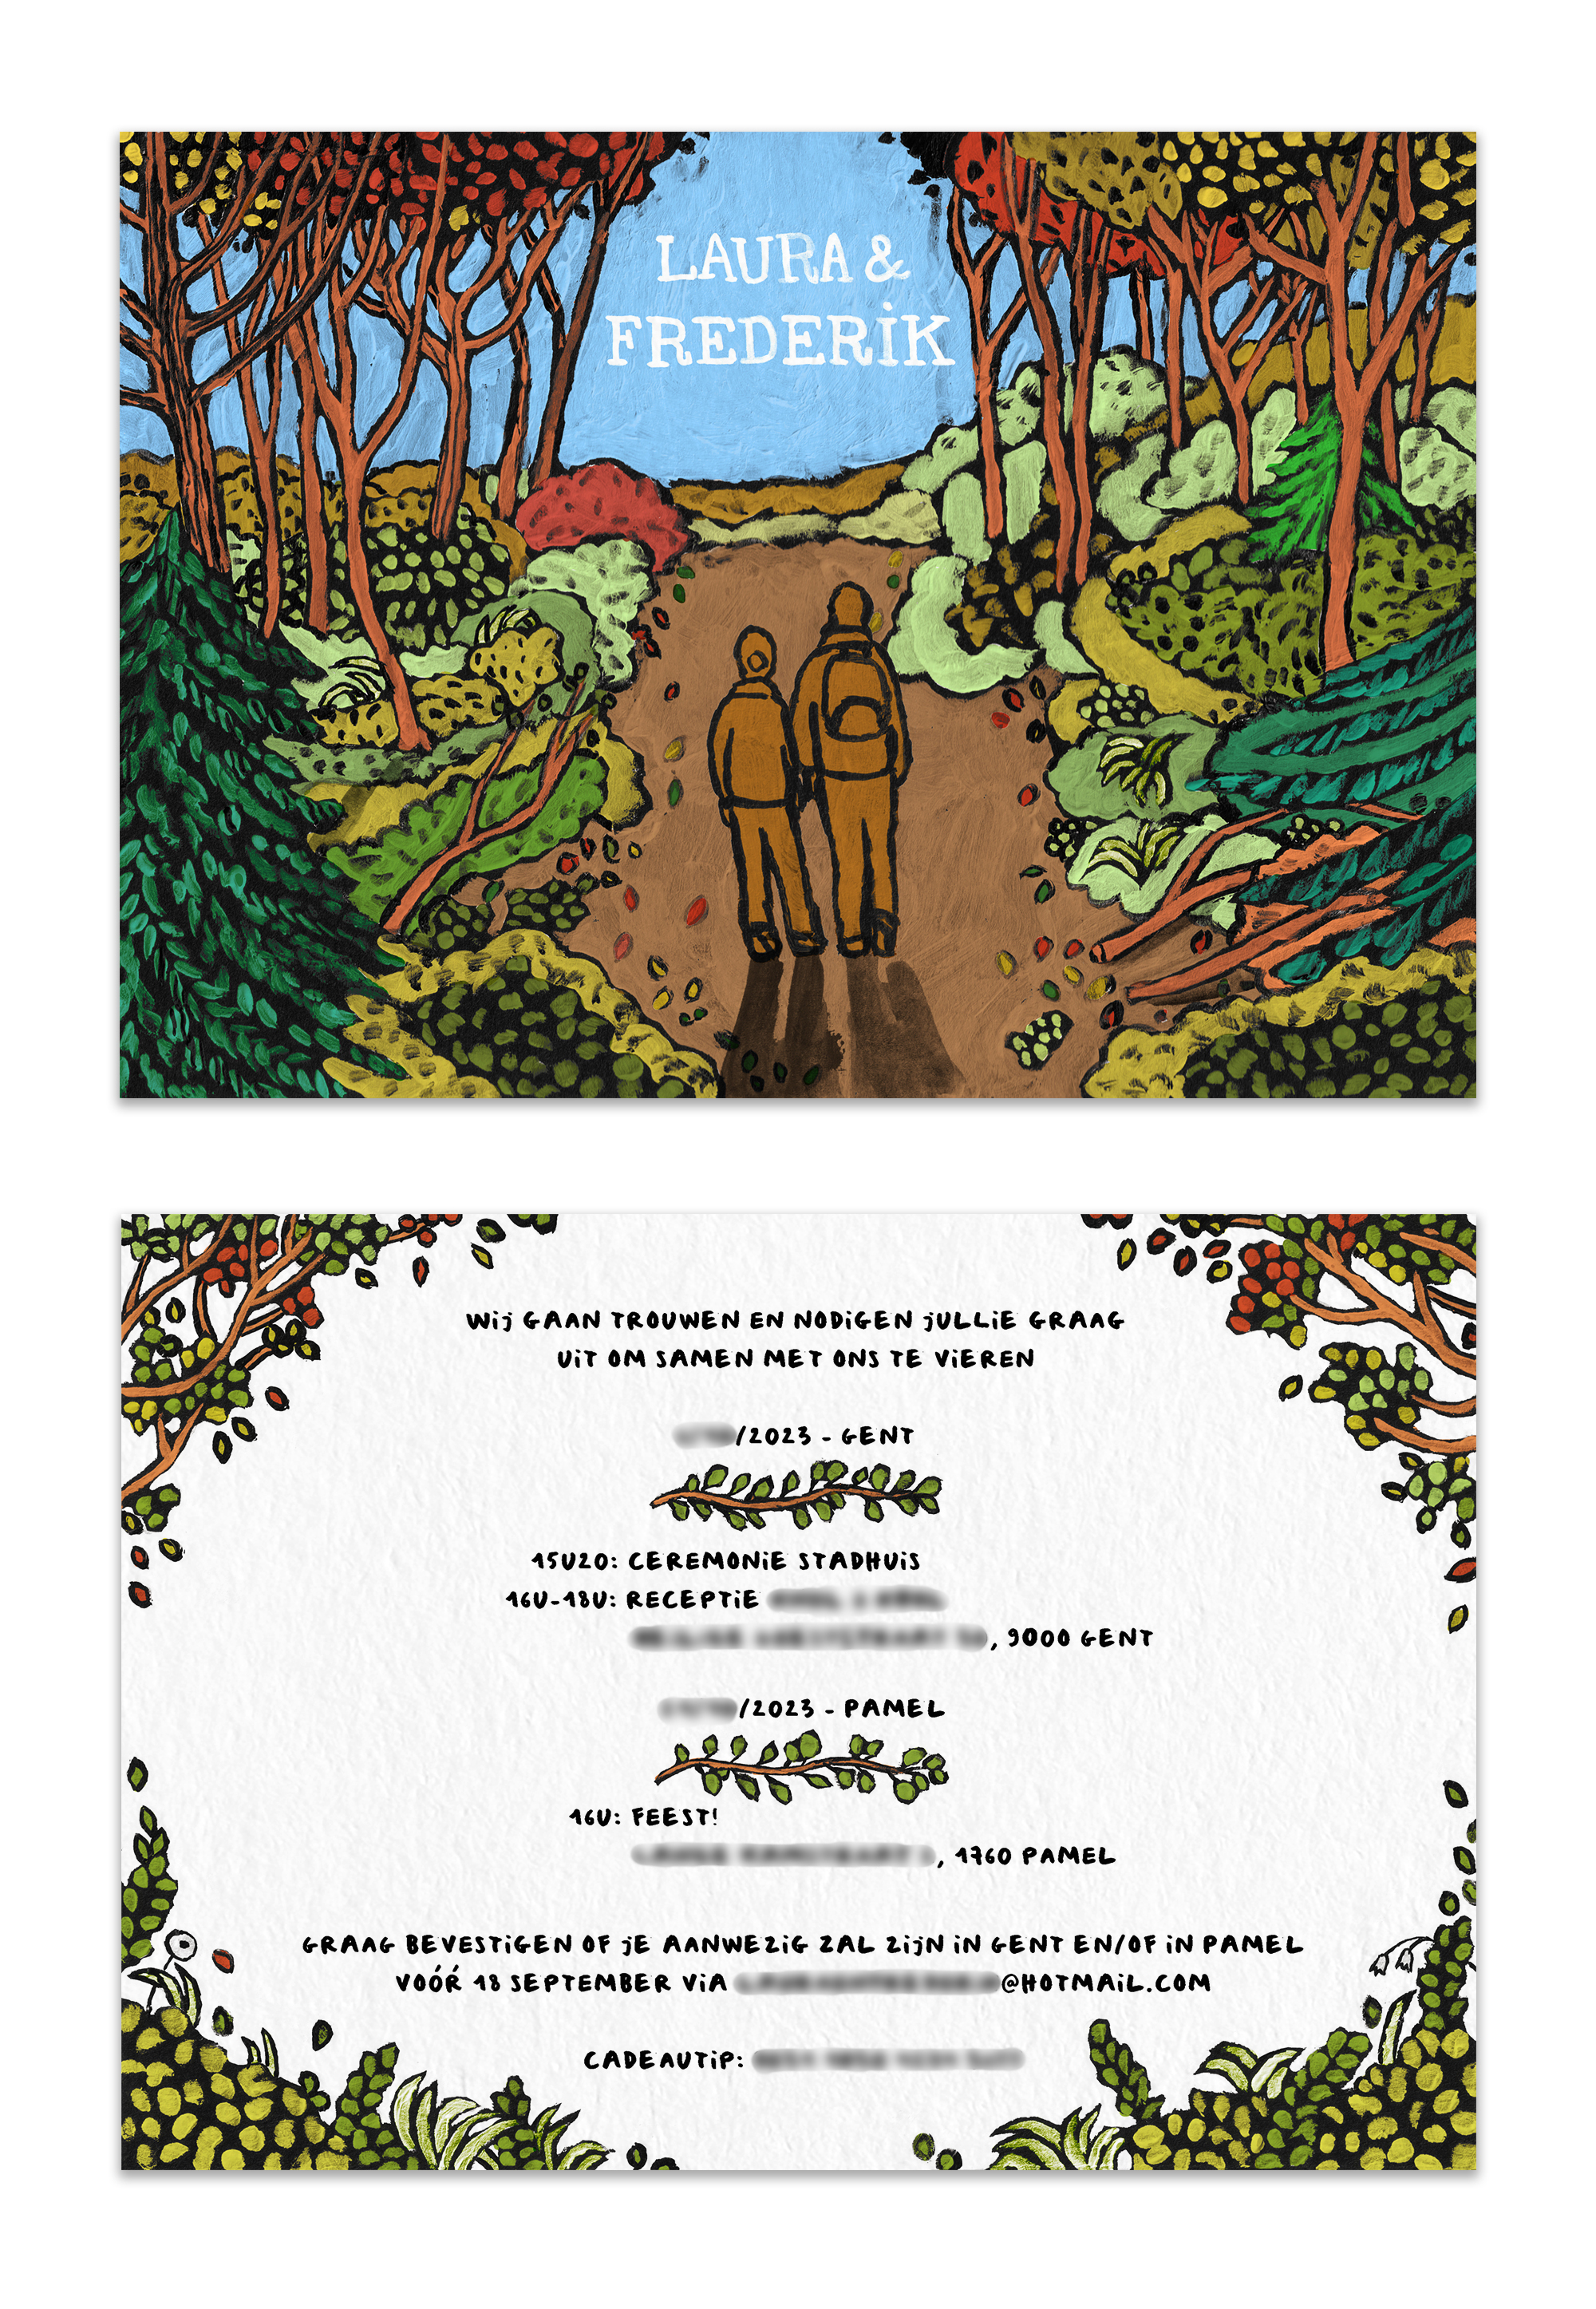 Hand painted wedding invitations, with an illustration of a couple walking through a forest and a handlettered text